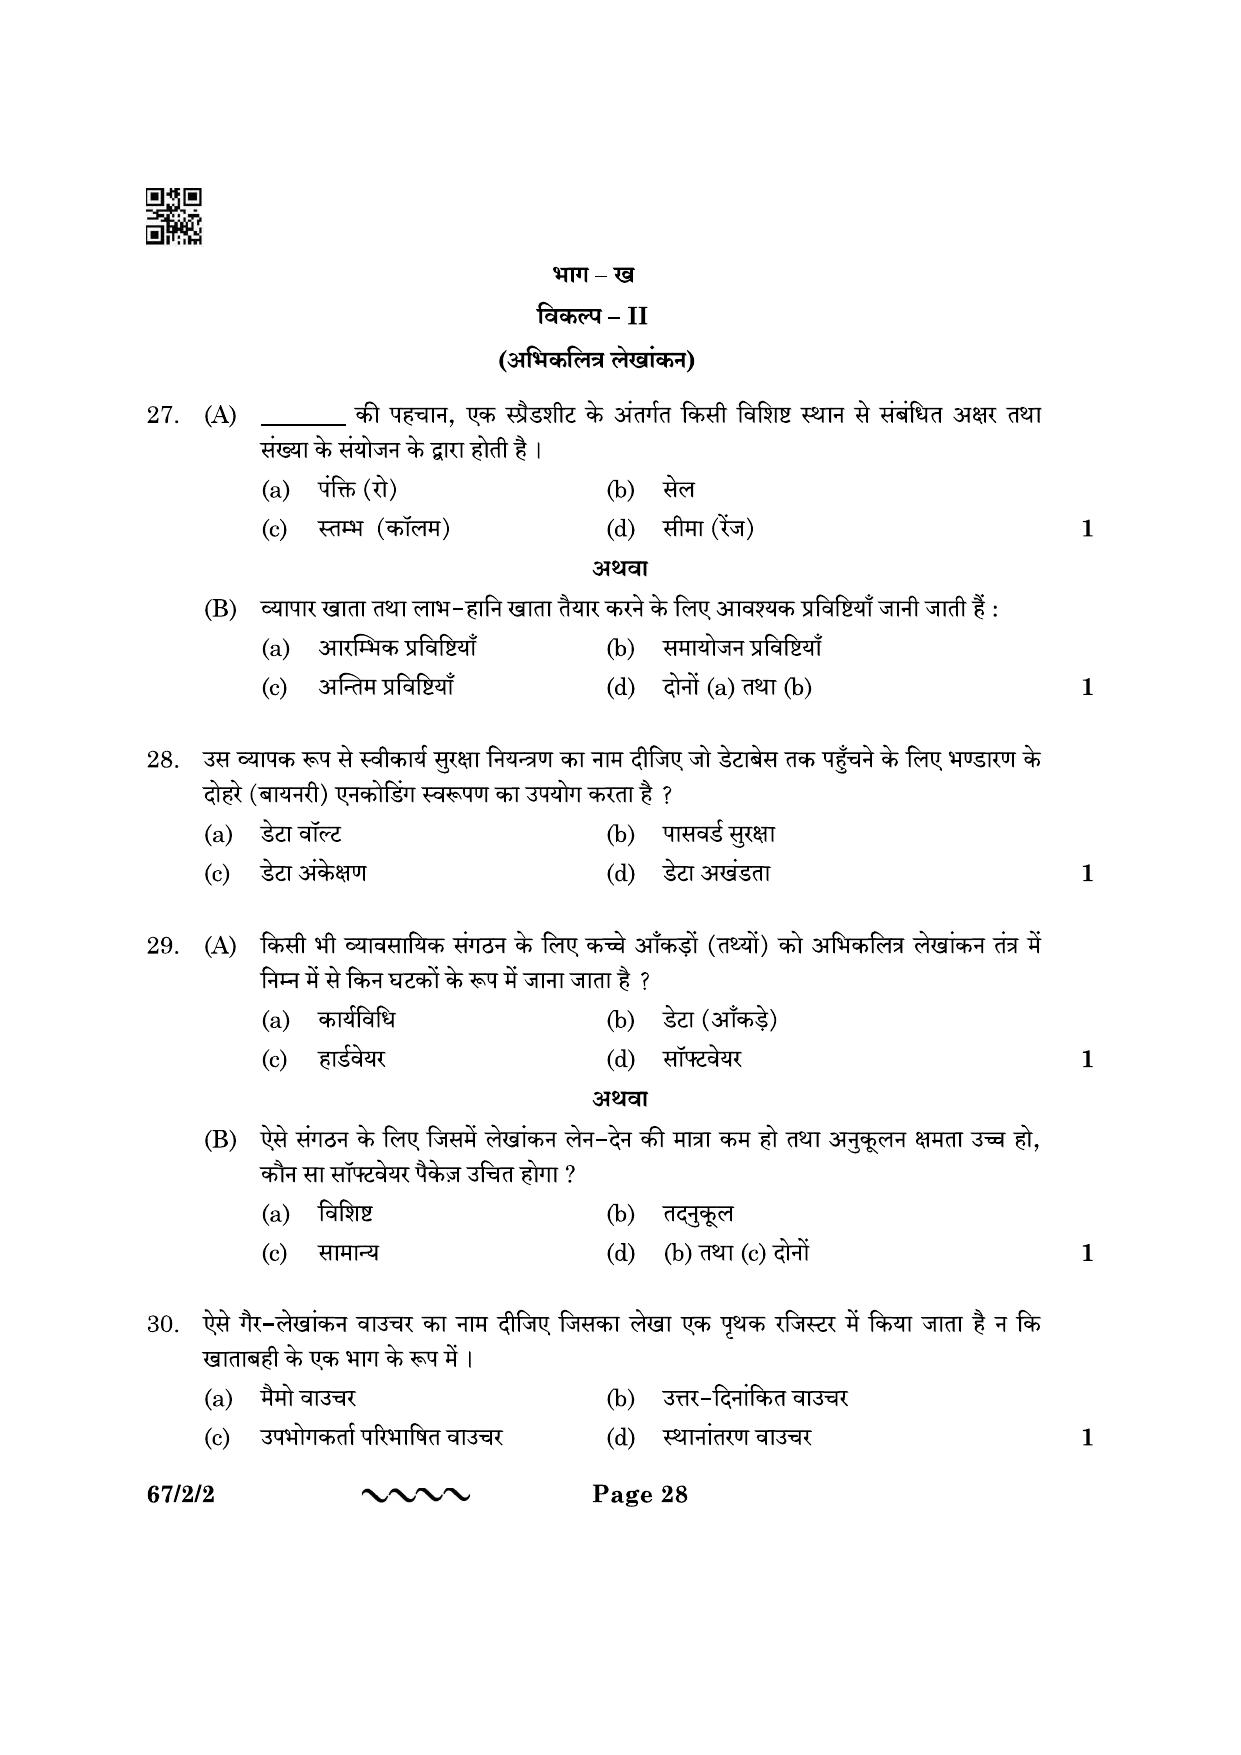 CBSE Class 12 67-2-2 Accountancy 2023 Question Paper - Page 28